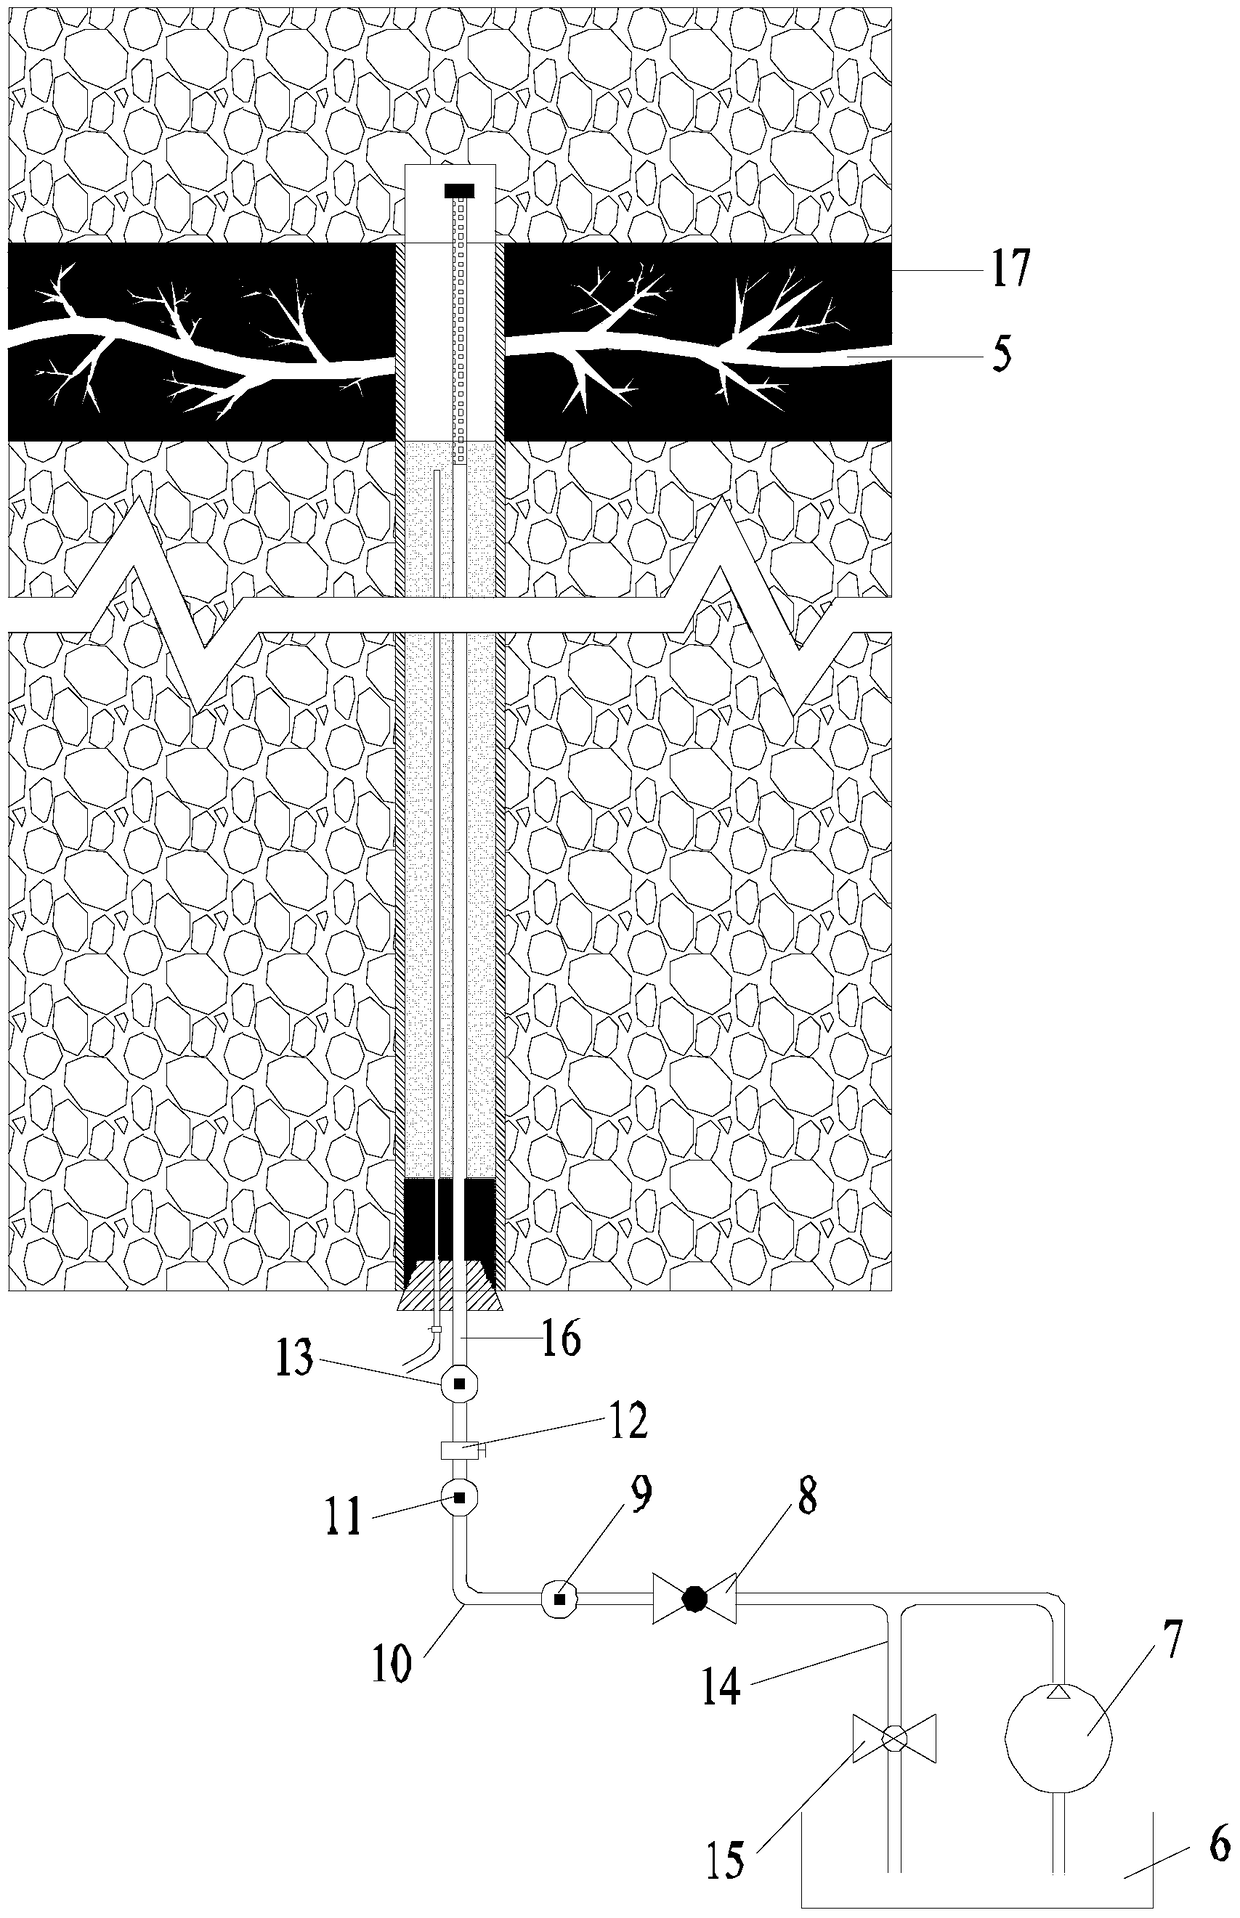 A method for controlling the expansion of coal mine fracturing cracks